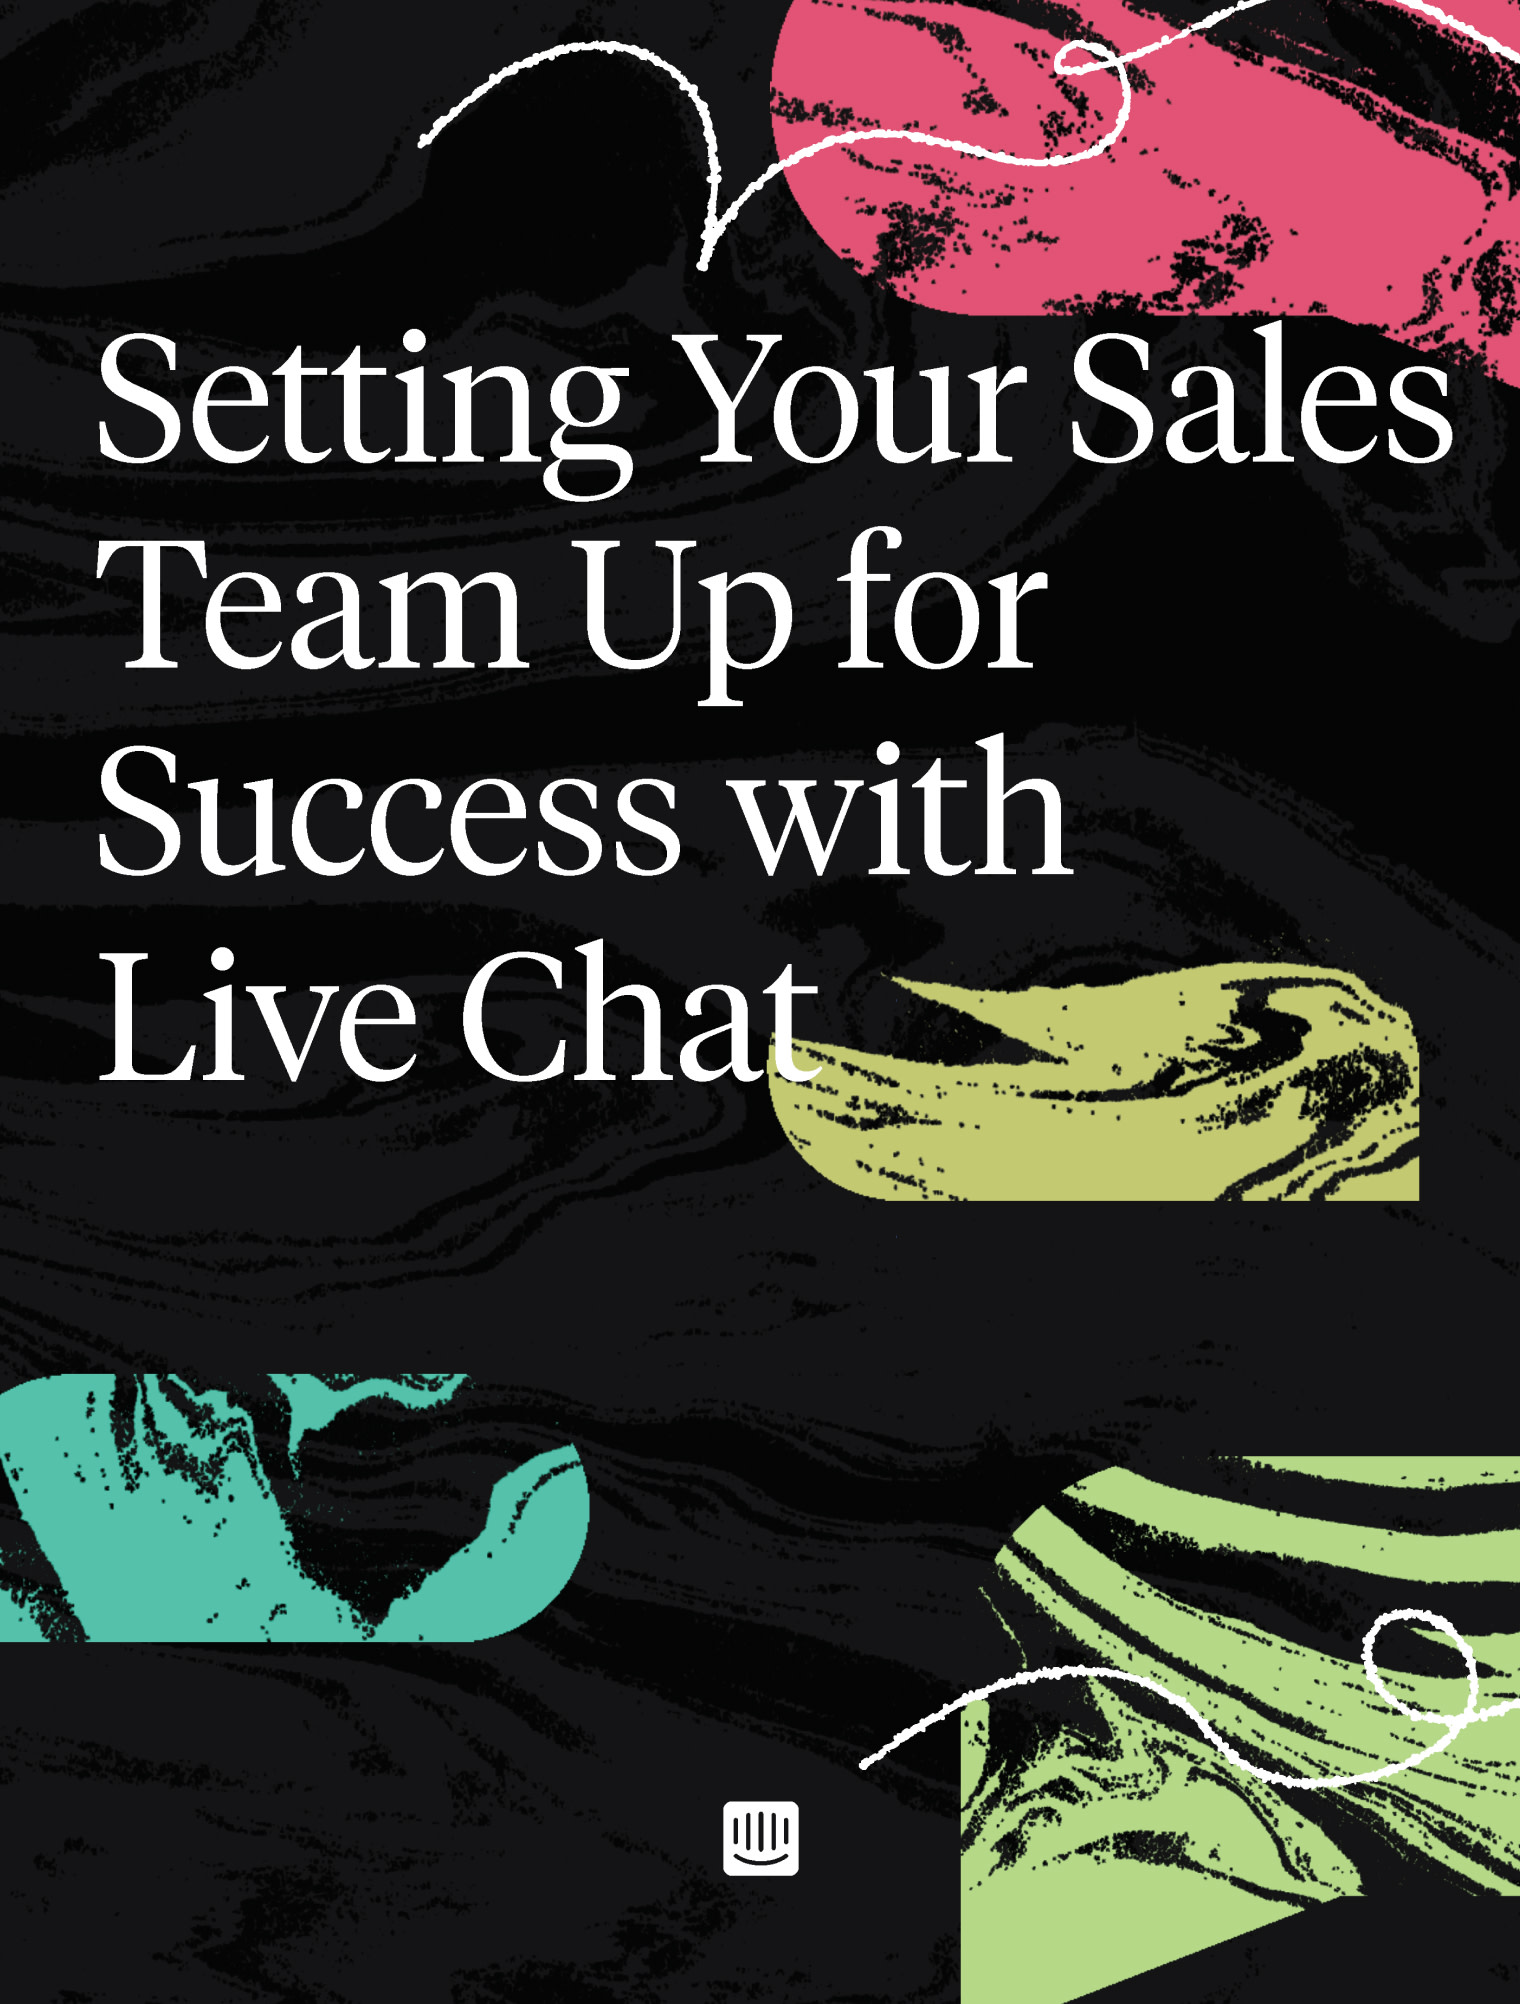 Setting Your Sales Team Up with Live Chat